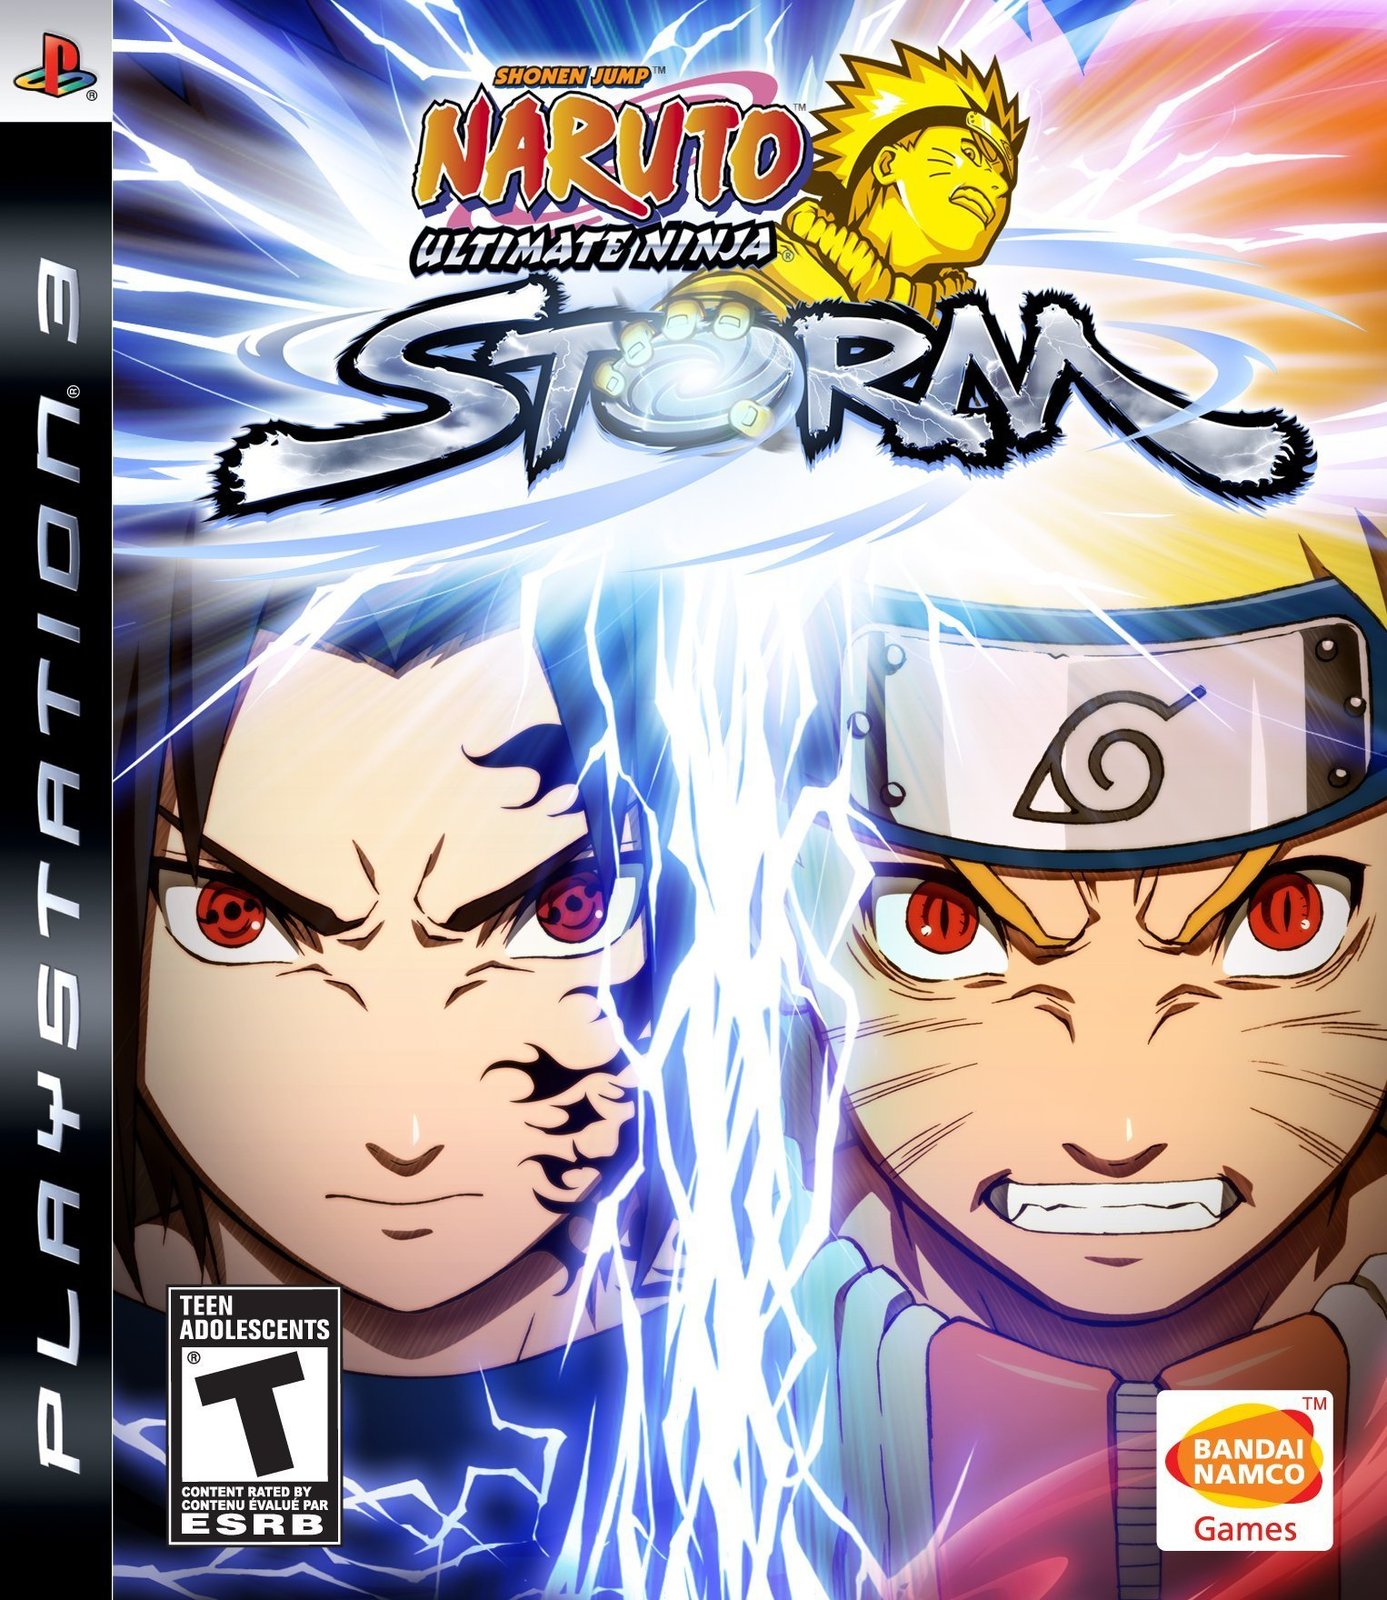 naruto games for pc download